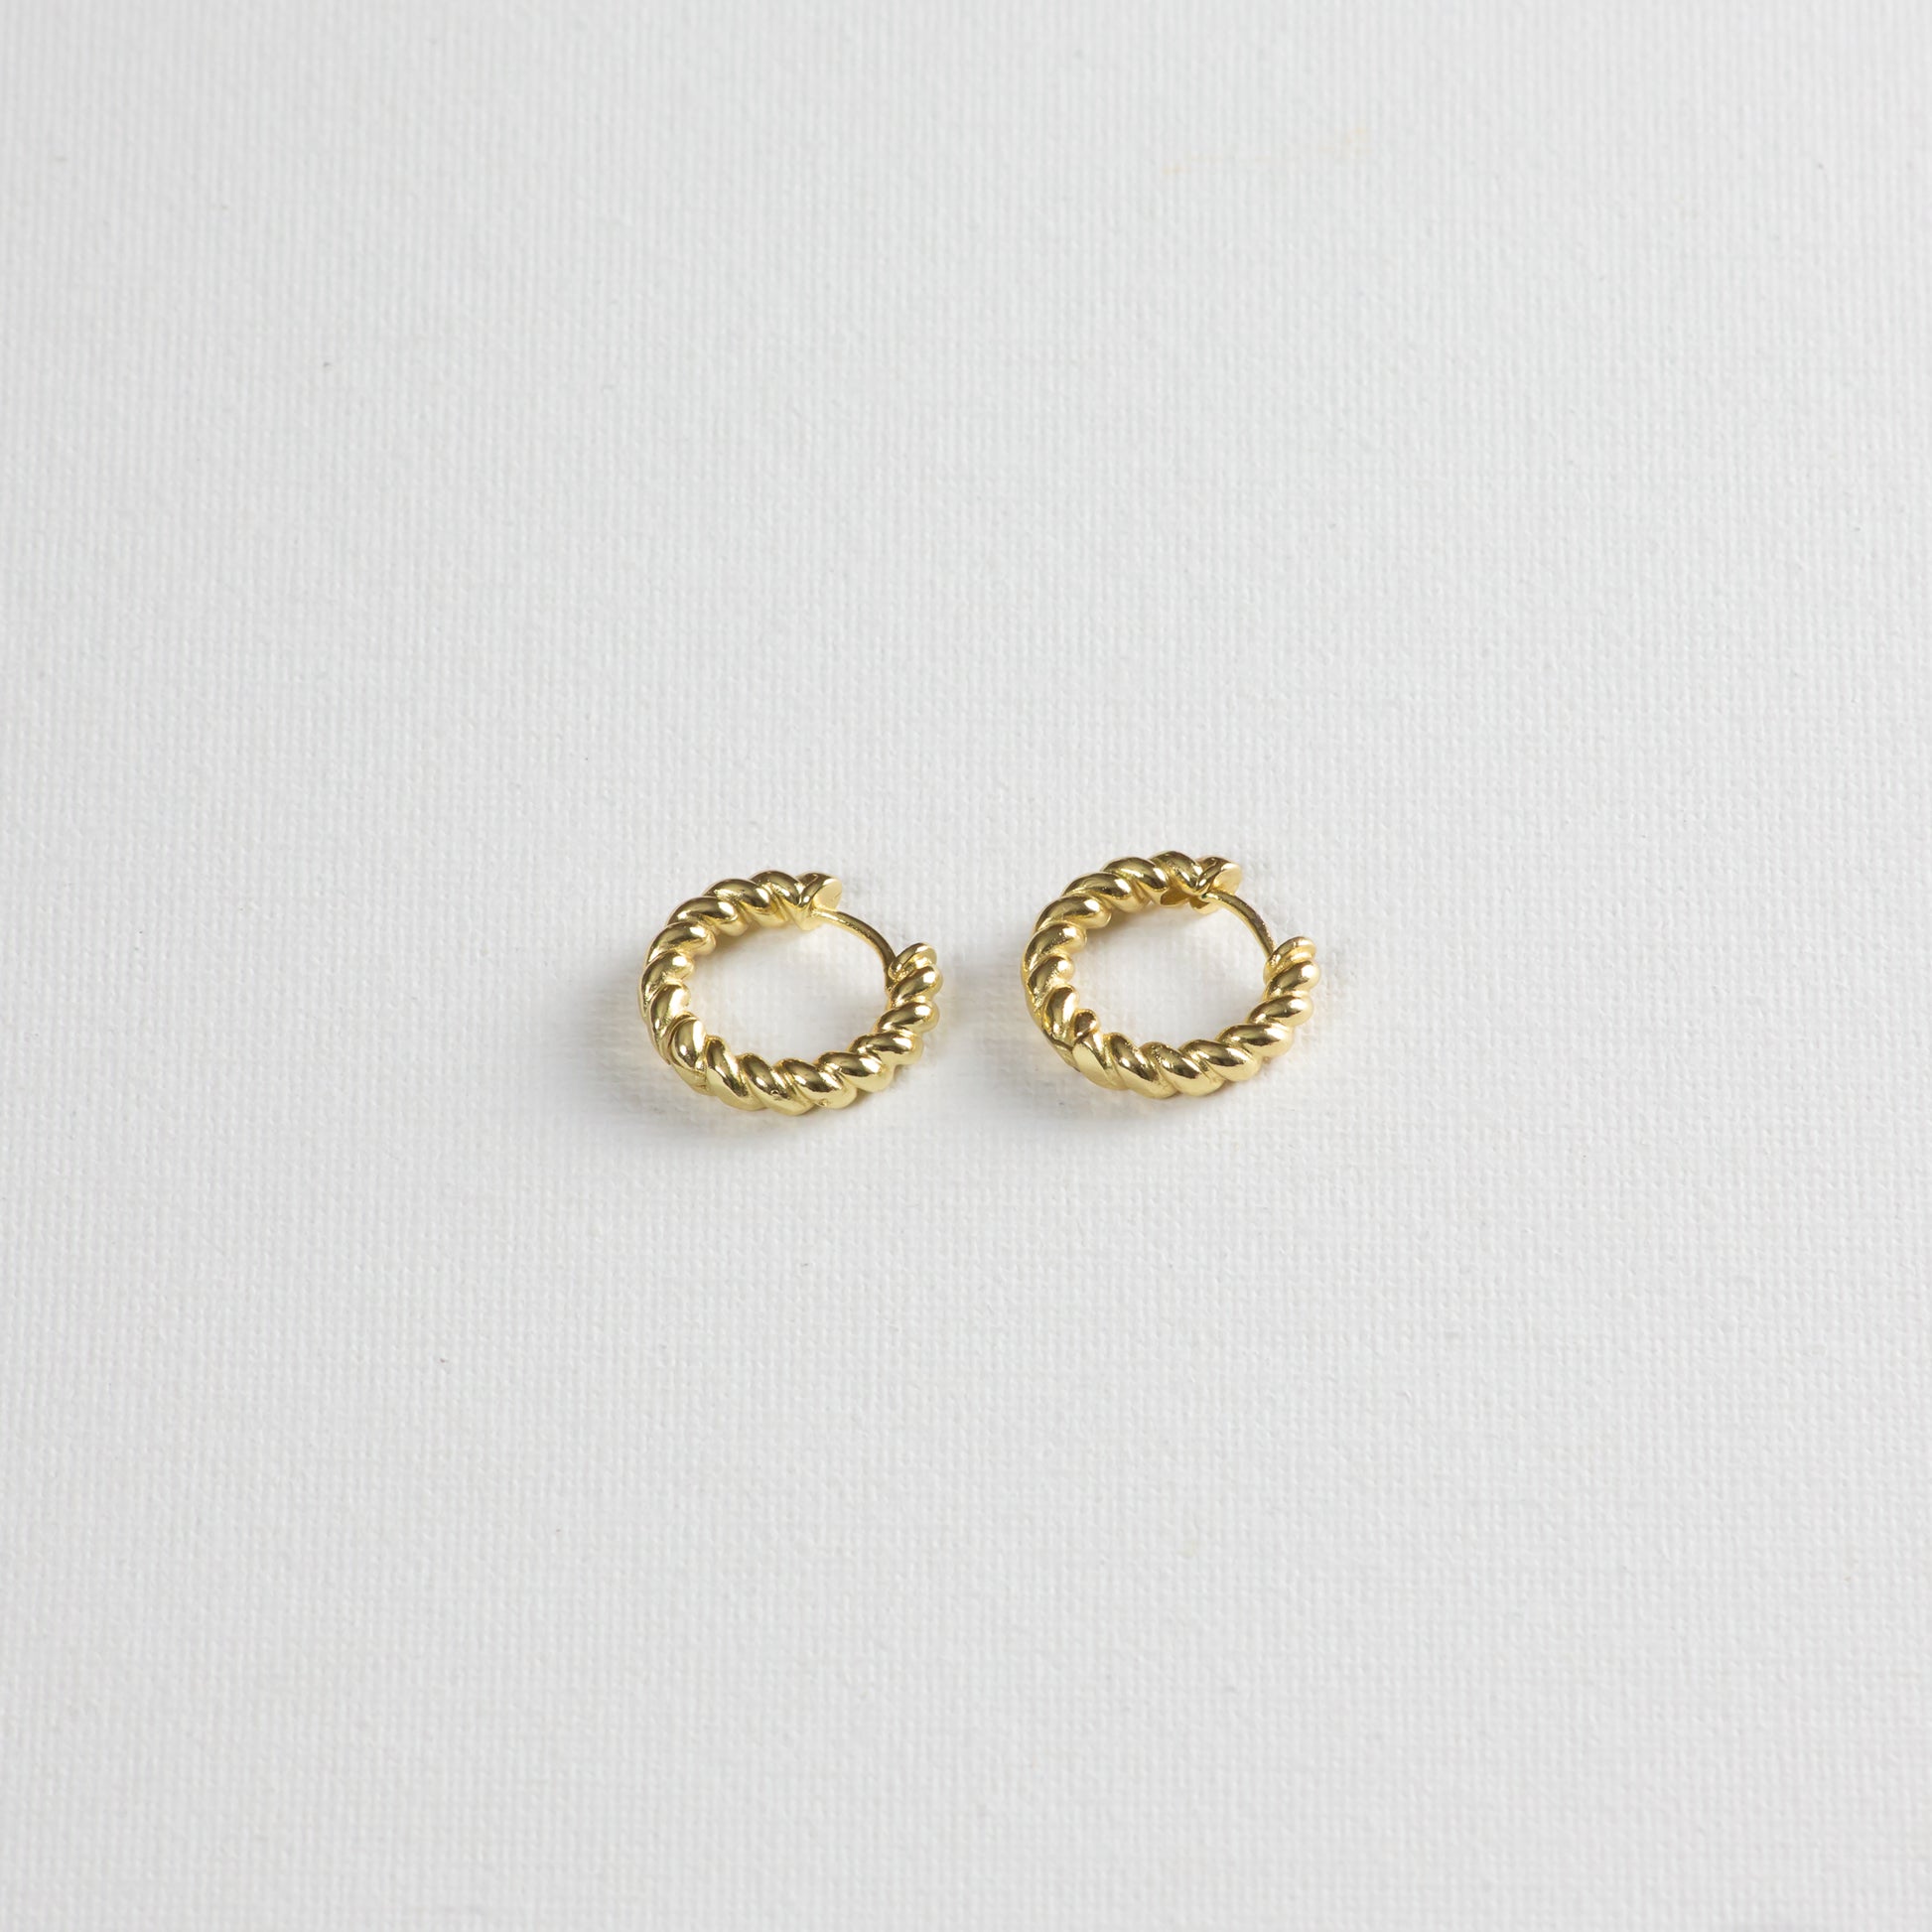 A different angle of the Honey crueller hoops on a white background.